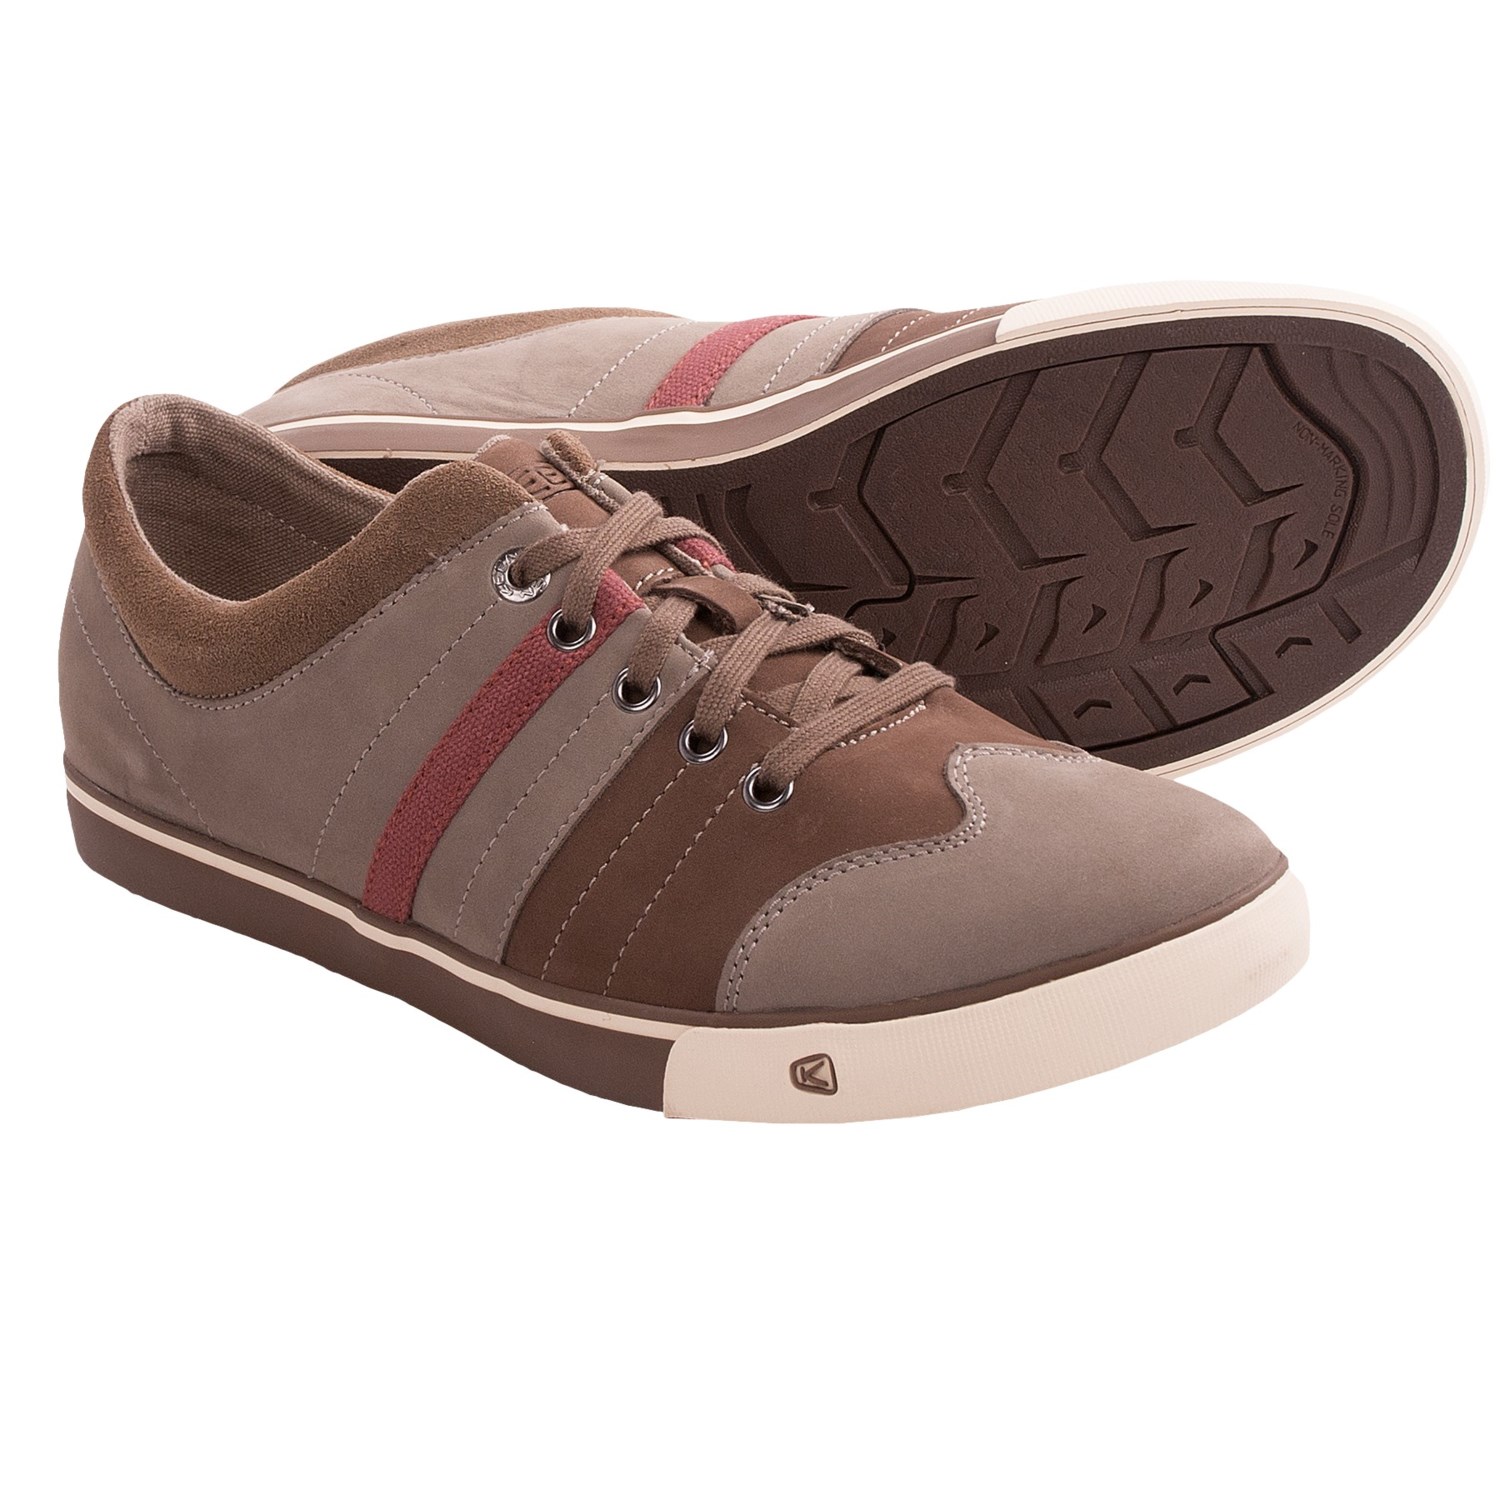 Keen Jackson Shoes - Lace-Ups (For Men) in Shitake